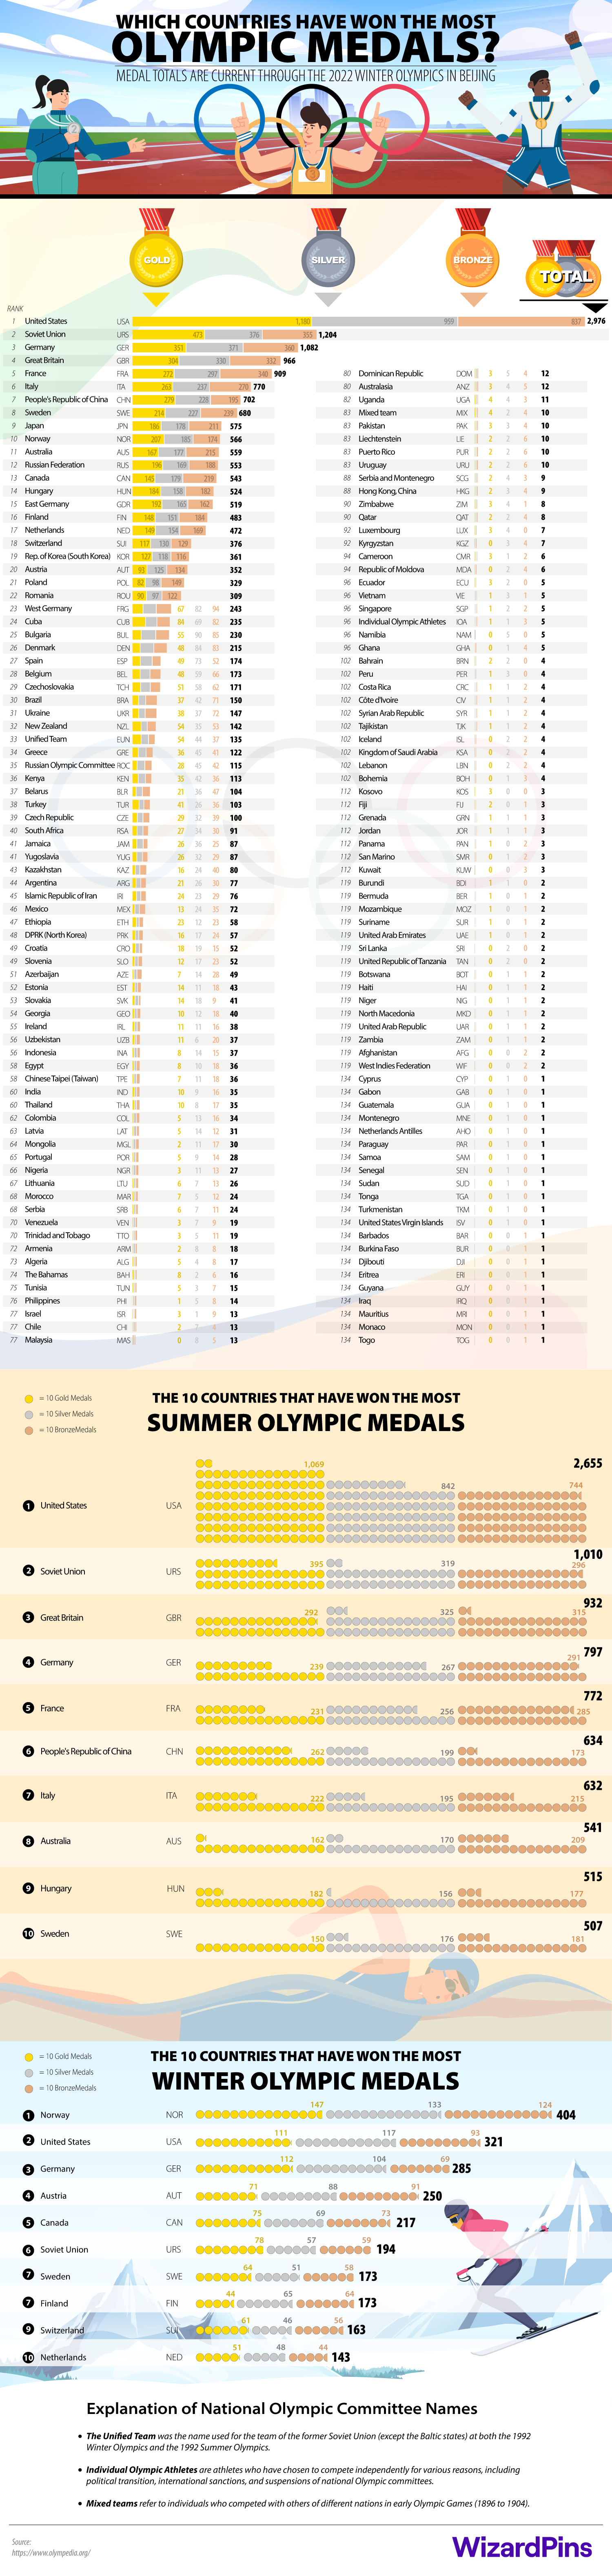 olympic-medals-by-country